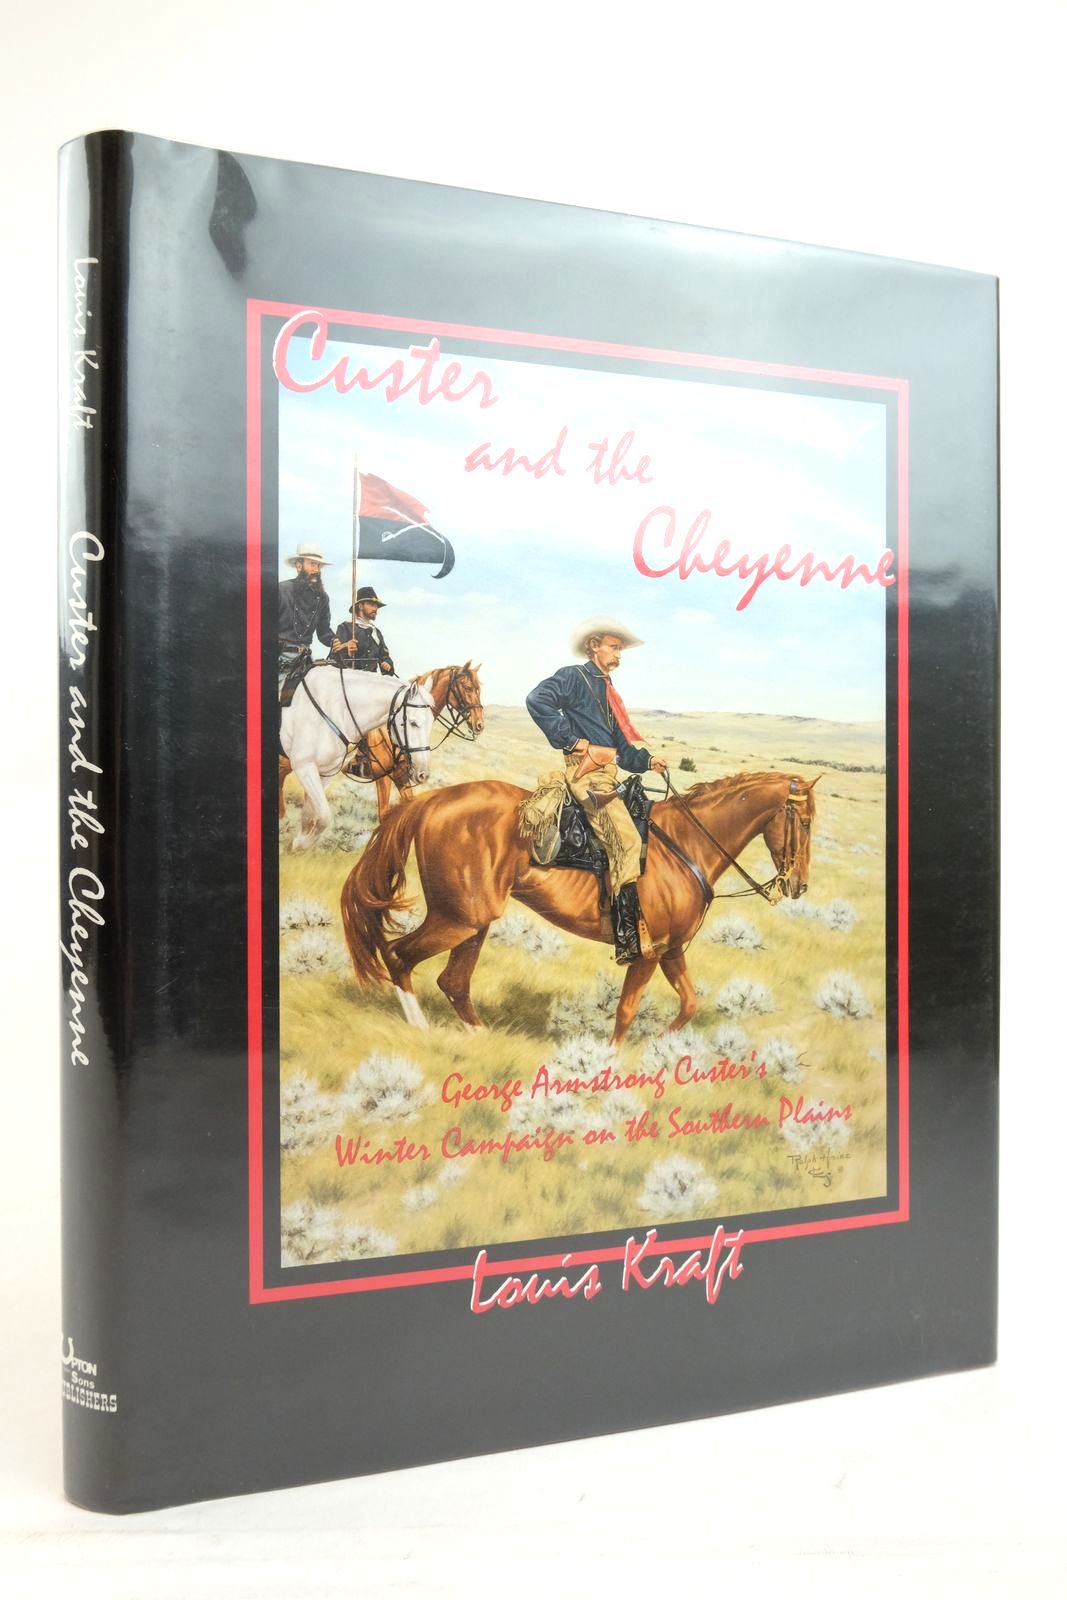 Photo of CUSTER AND THE CHEYENNE- Stock Number: 2136602